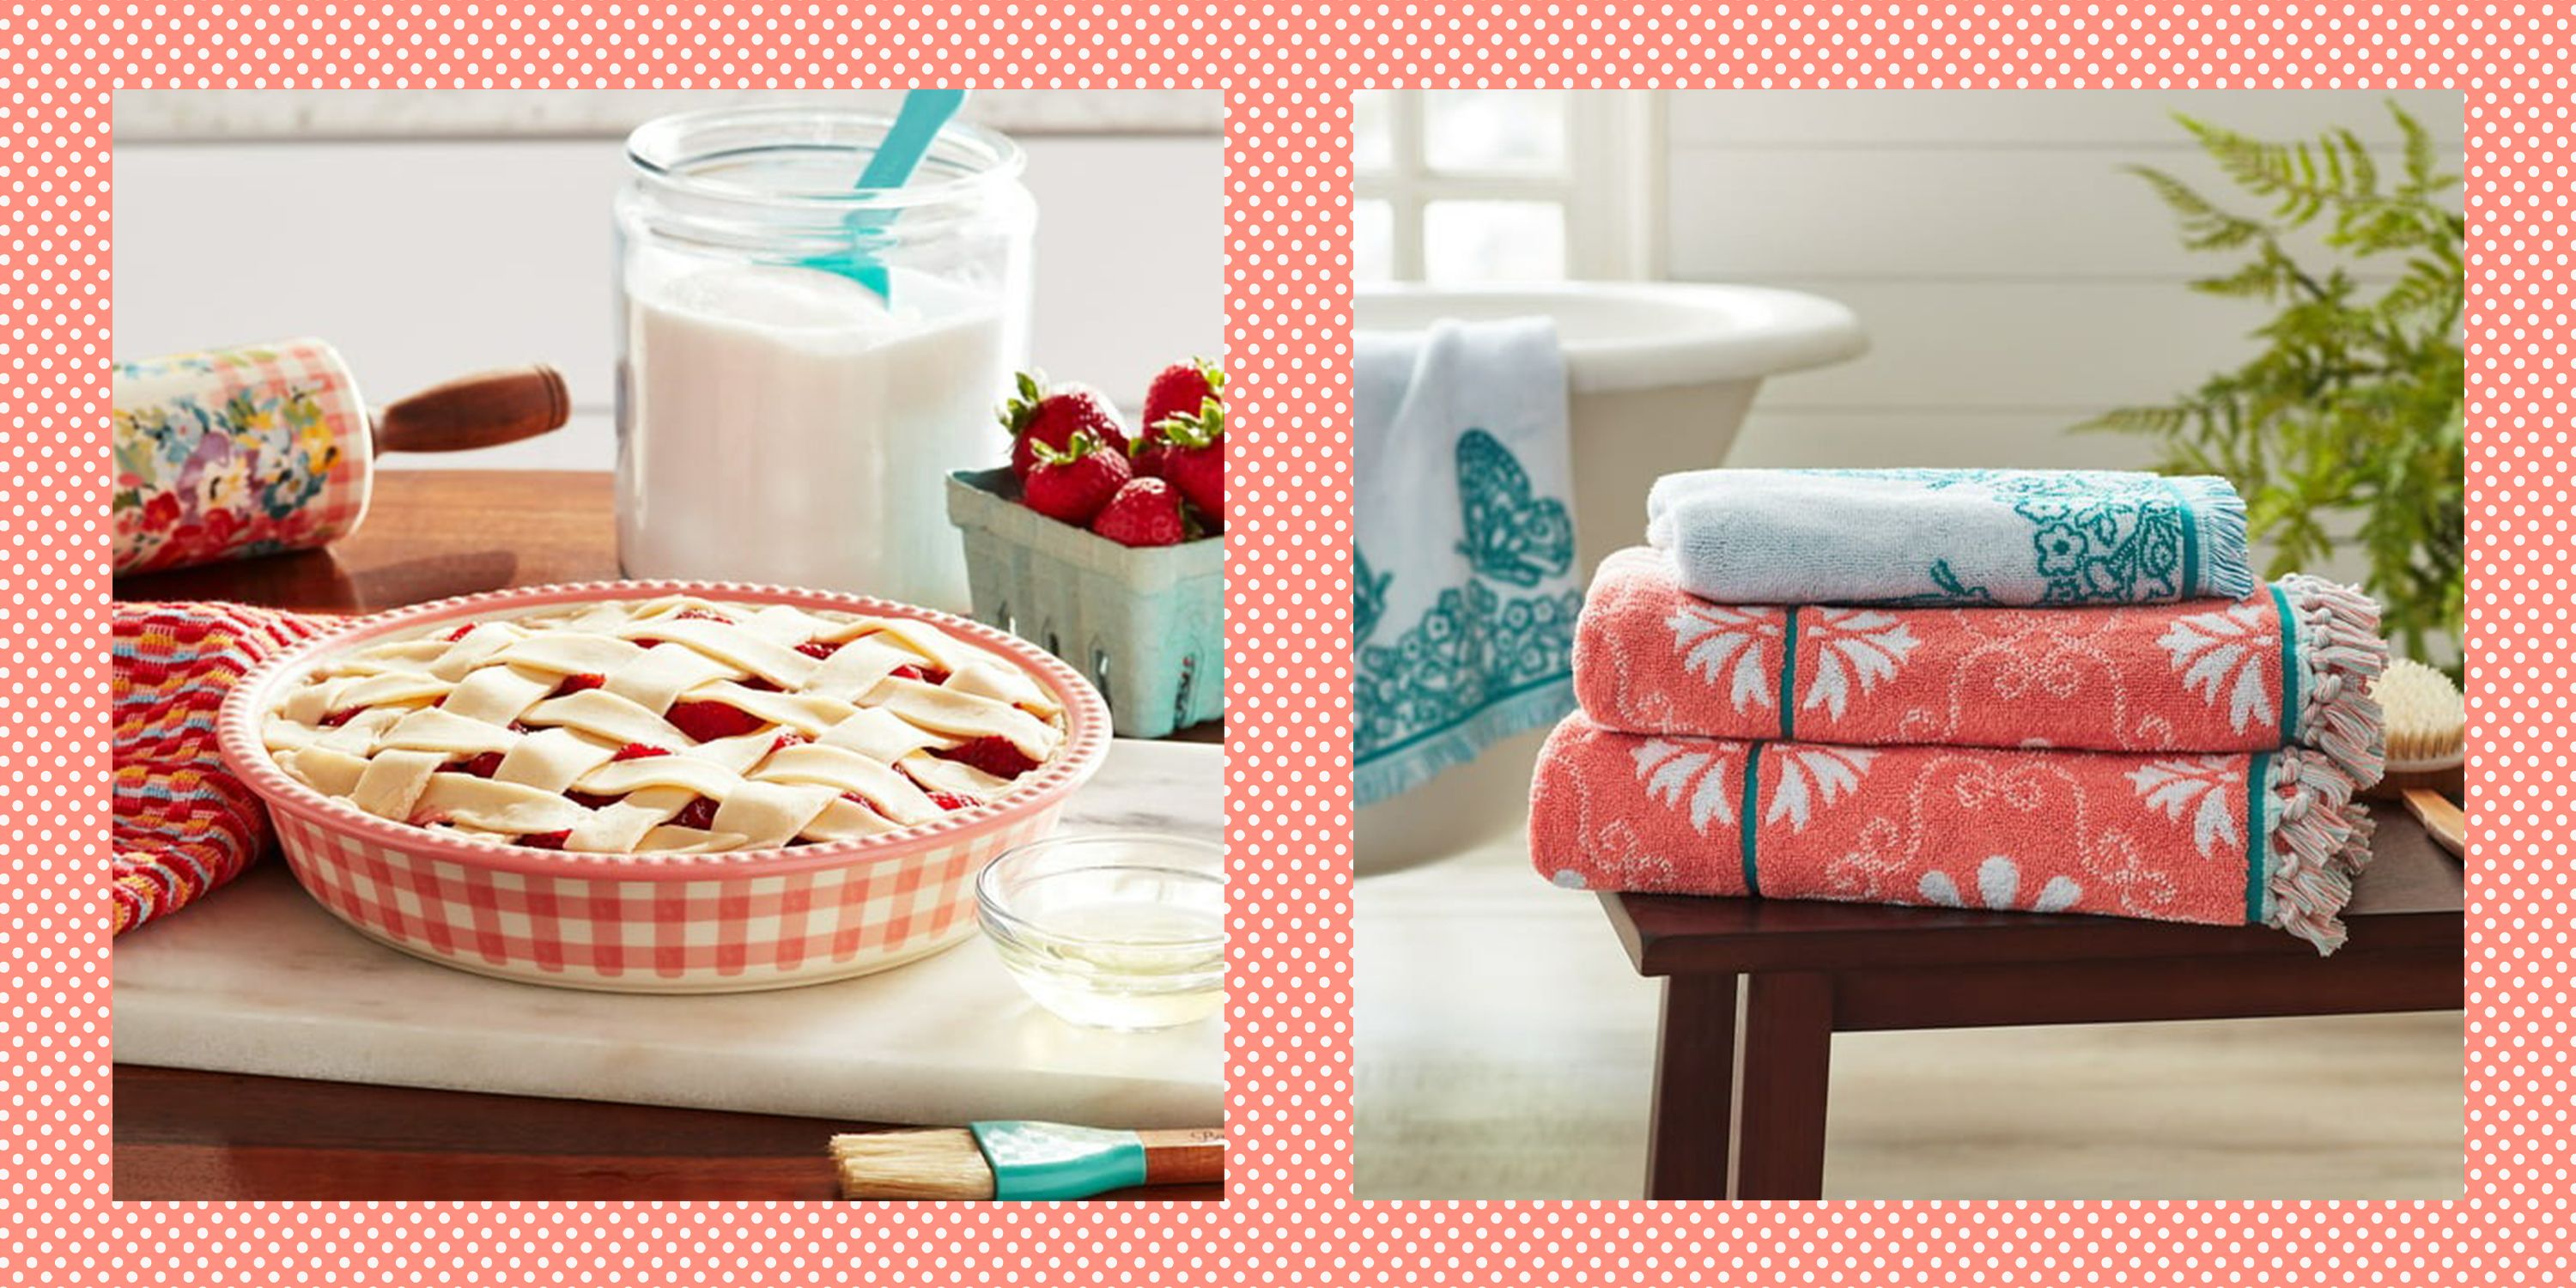 The Pioneer Woman new bath and bedding collections launch at Walmart